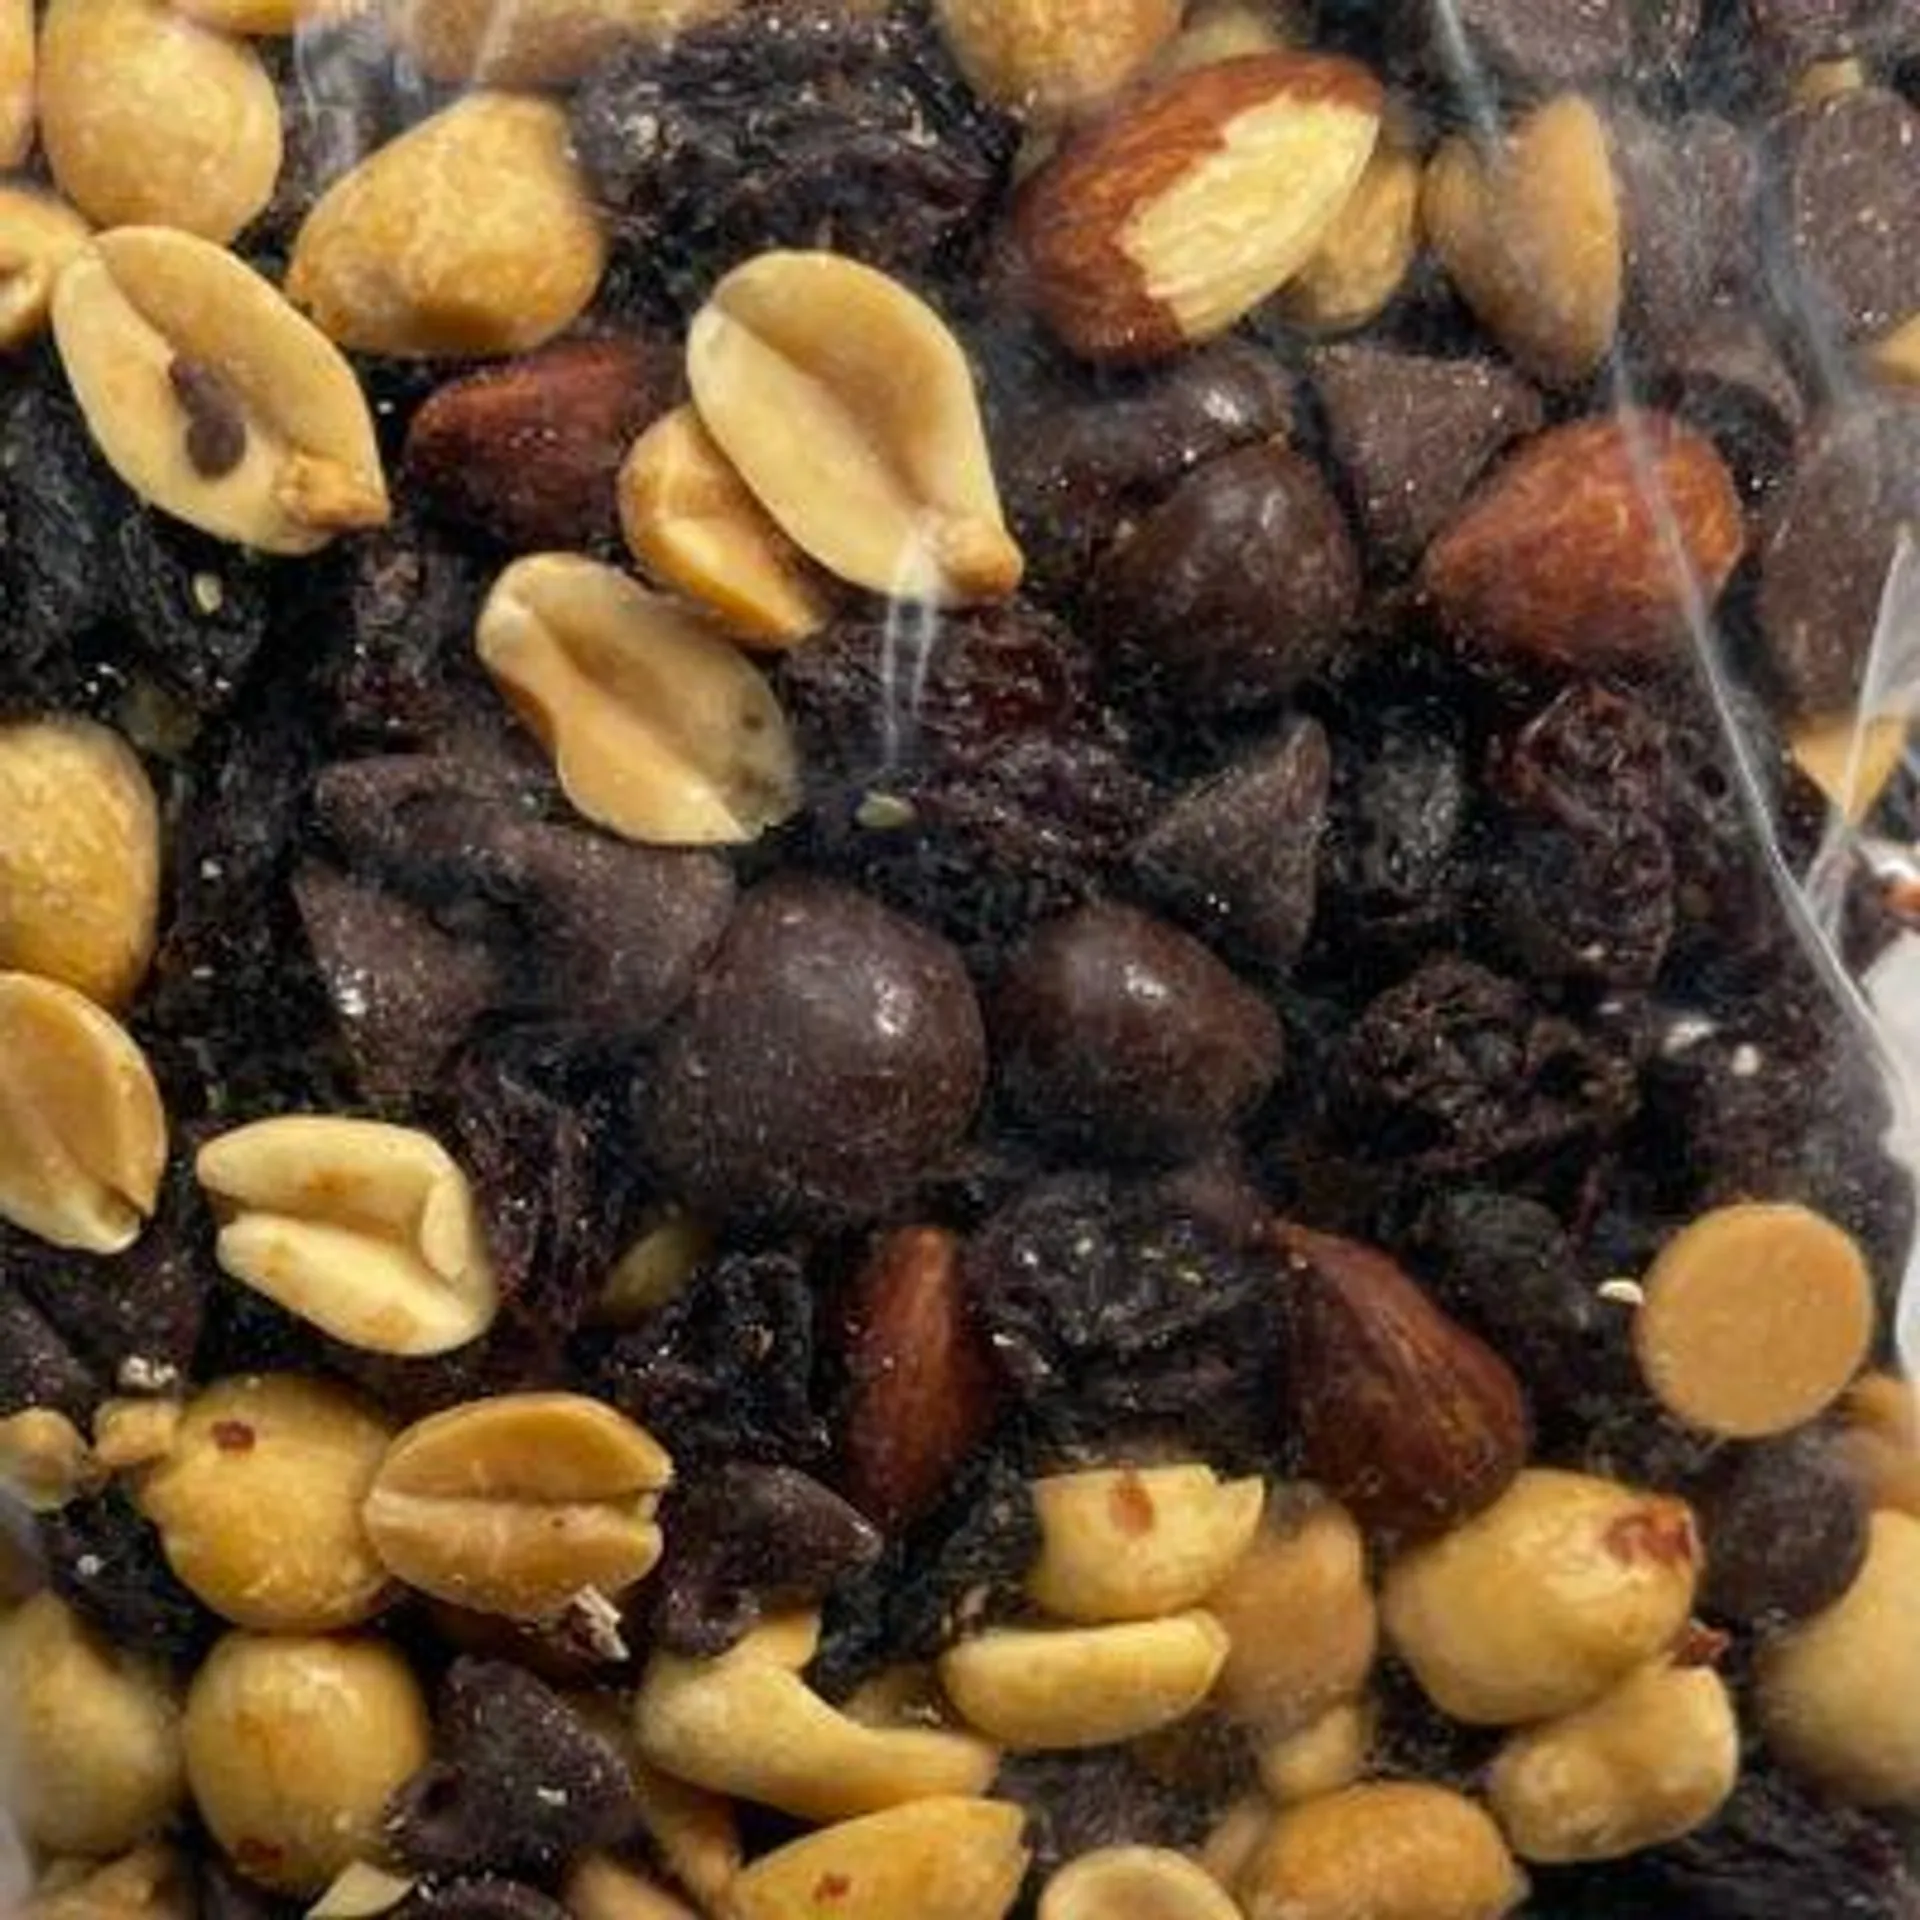 Chocolate Nut Trail Mix (Packaged)